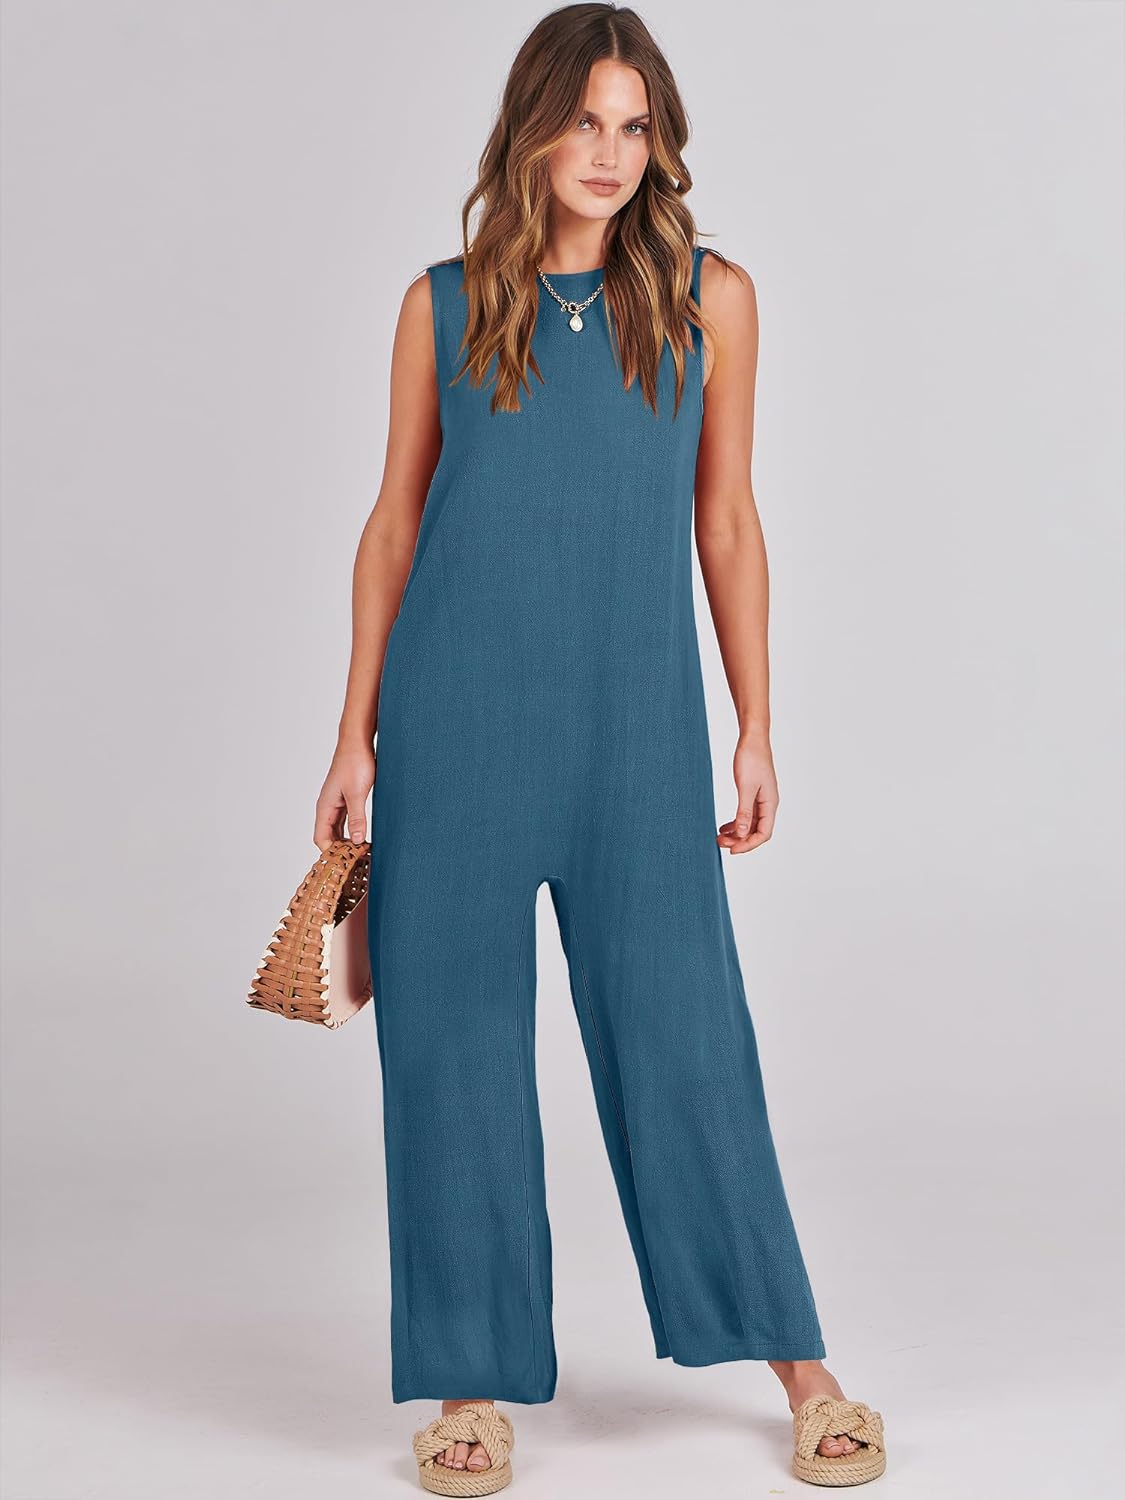 ANRABESS Womens Summer Casual Sleeveless Jumpsuit Loose Wide Leg Long Pants Romper with Pockets 2023